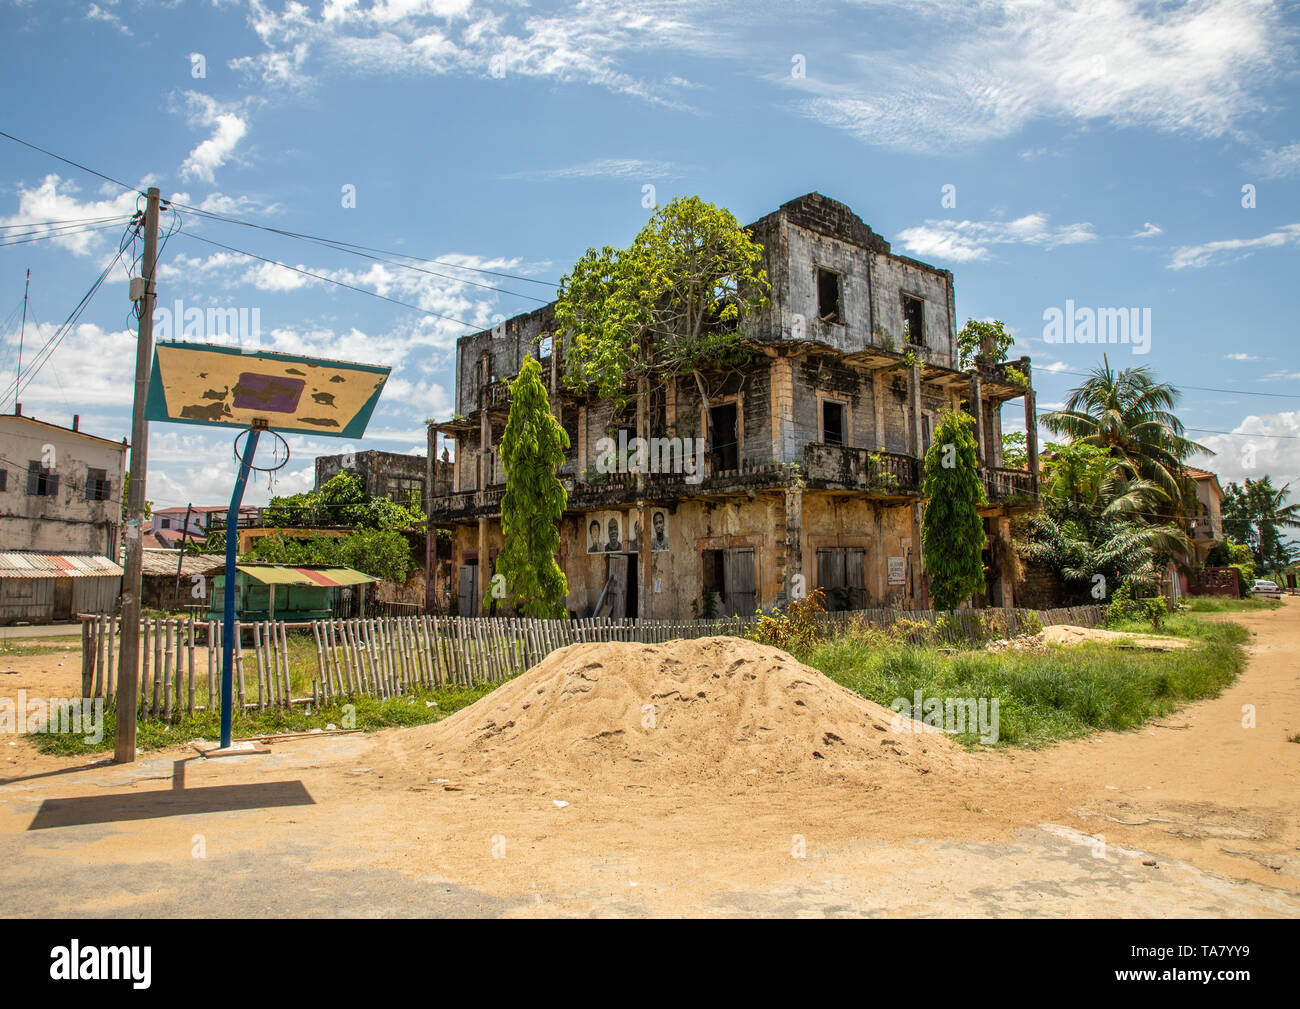 Old french colonial building formerly hotel de France in the UNESCO world heritage area, Sud-Comoé, Grand-Bassam, Ivory Coast Stock Photo